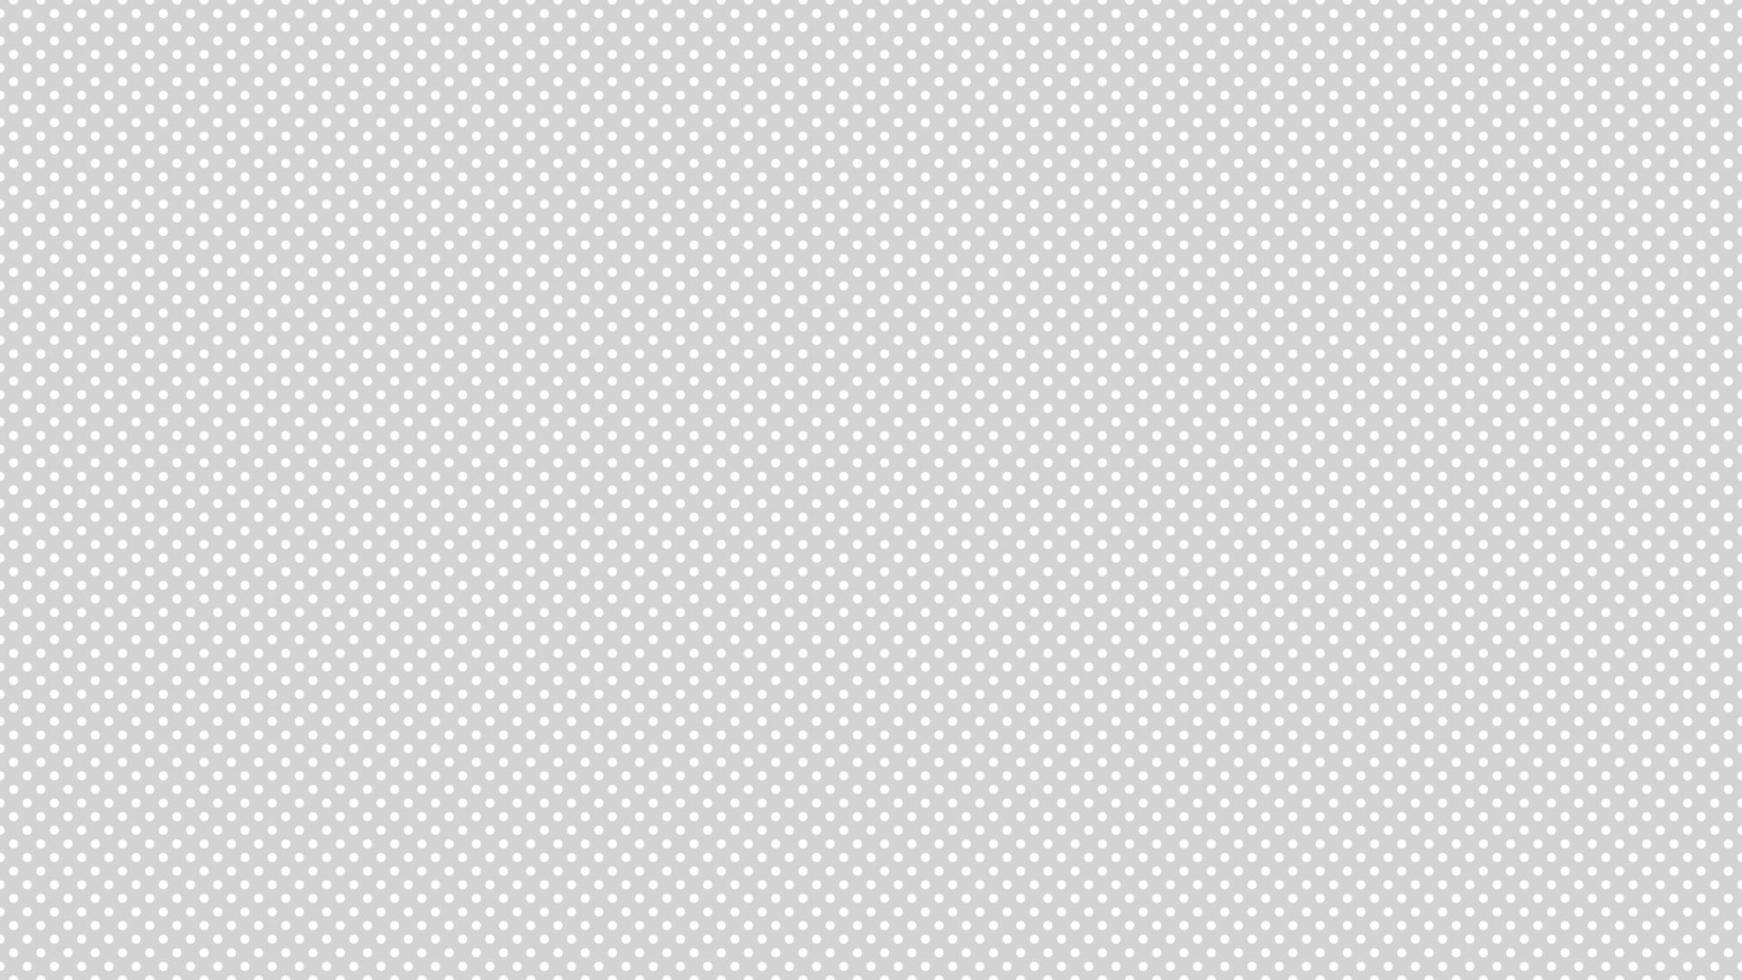 white color polka dots over light gray background vector